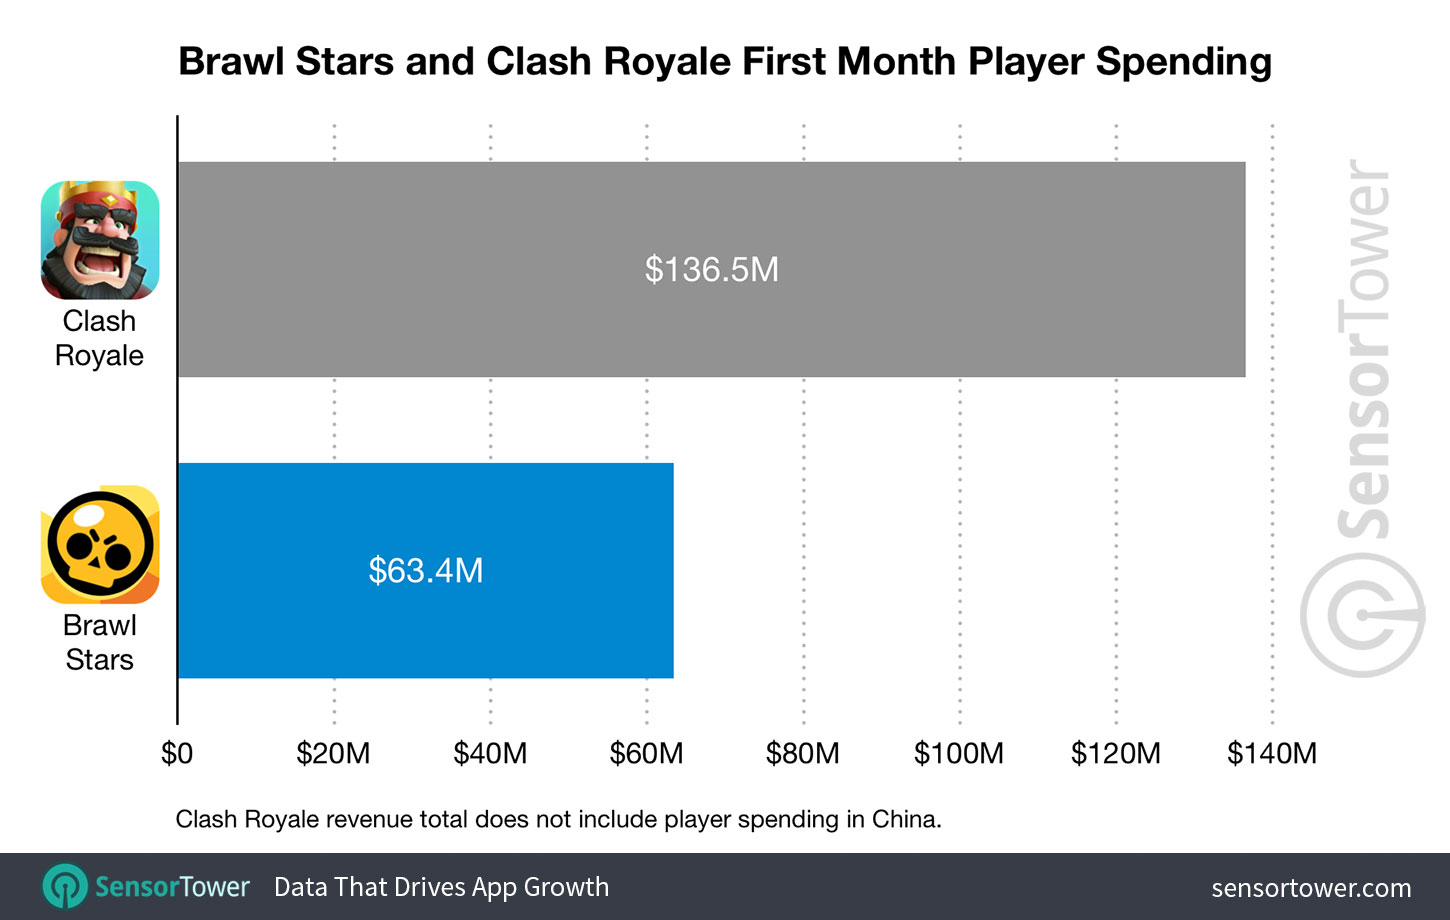 Brawl Stars  Revenue for Its First Month Compared to Clash Royale First Month Revenue